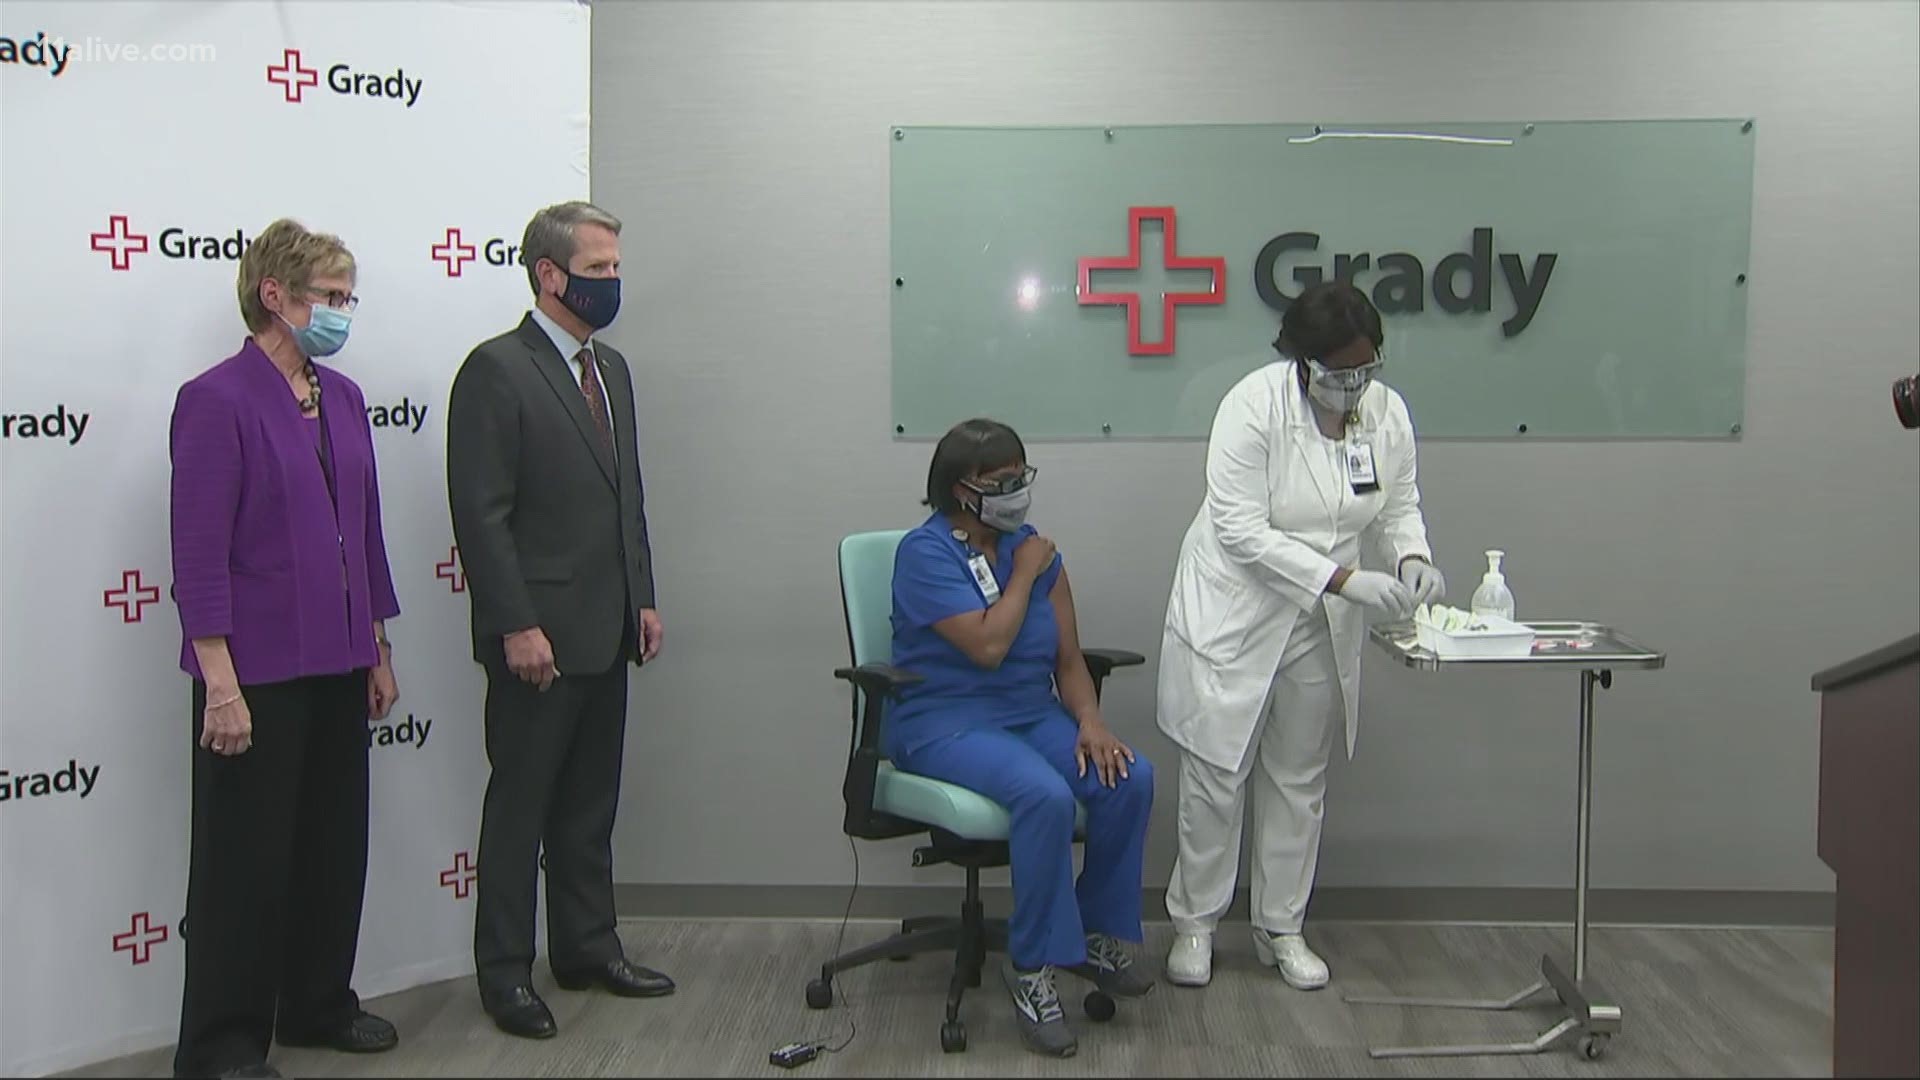 The vaccine was administered at Grady Memorial Hospital in Atlanta on Thursday.